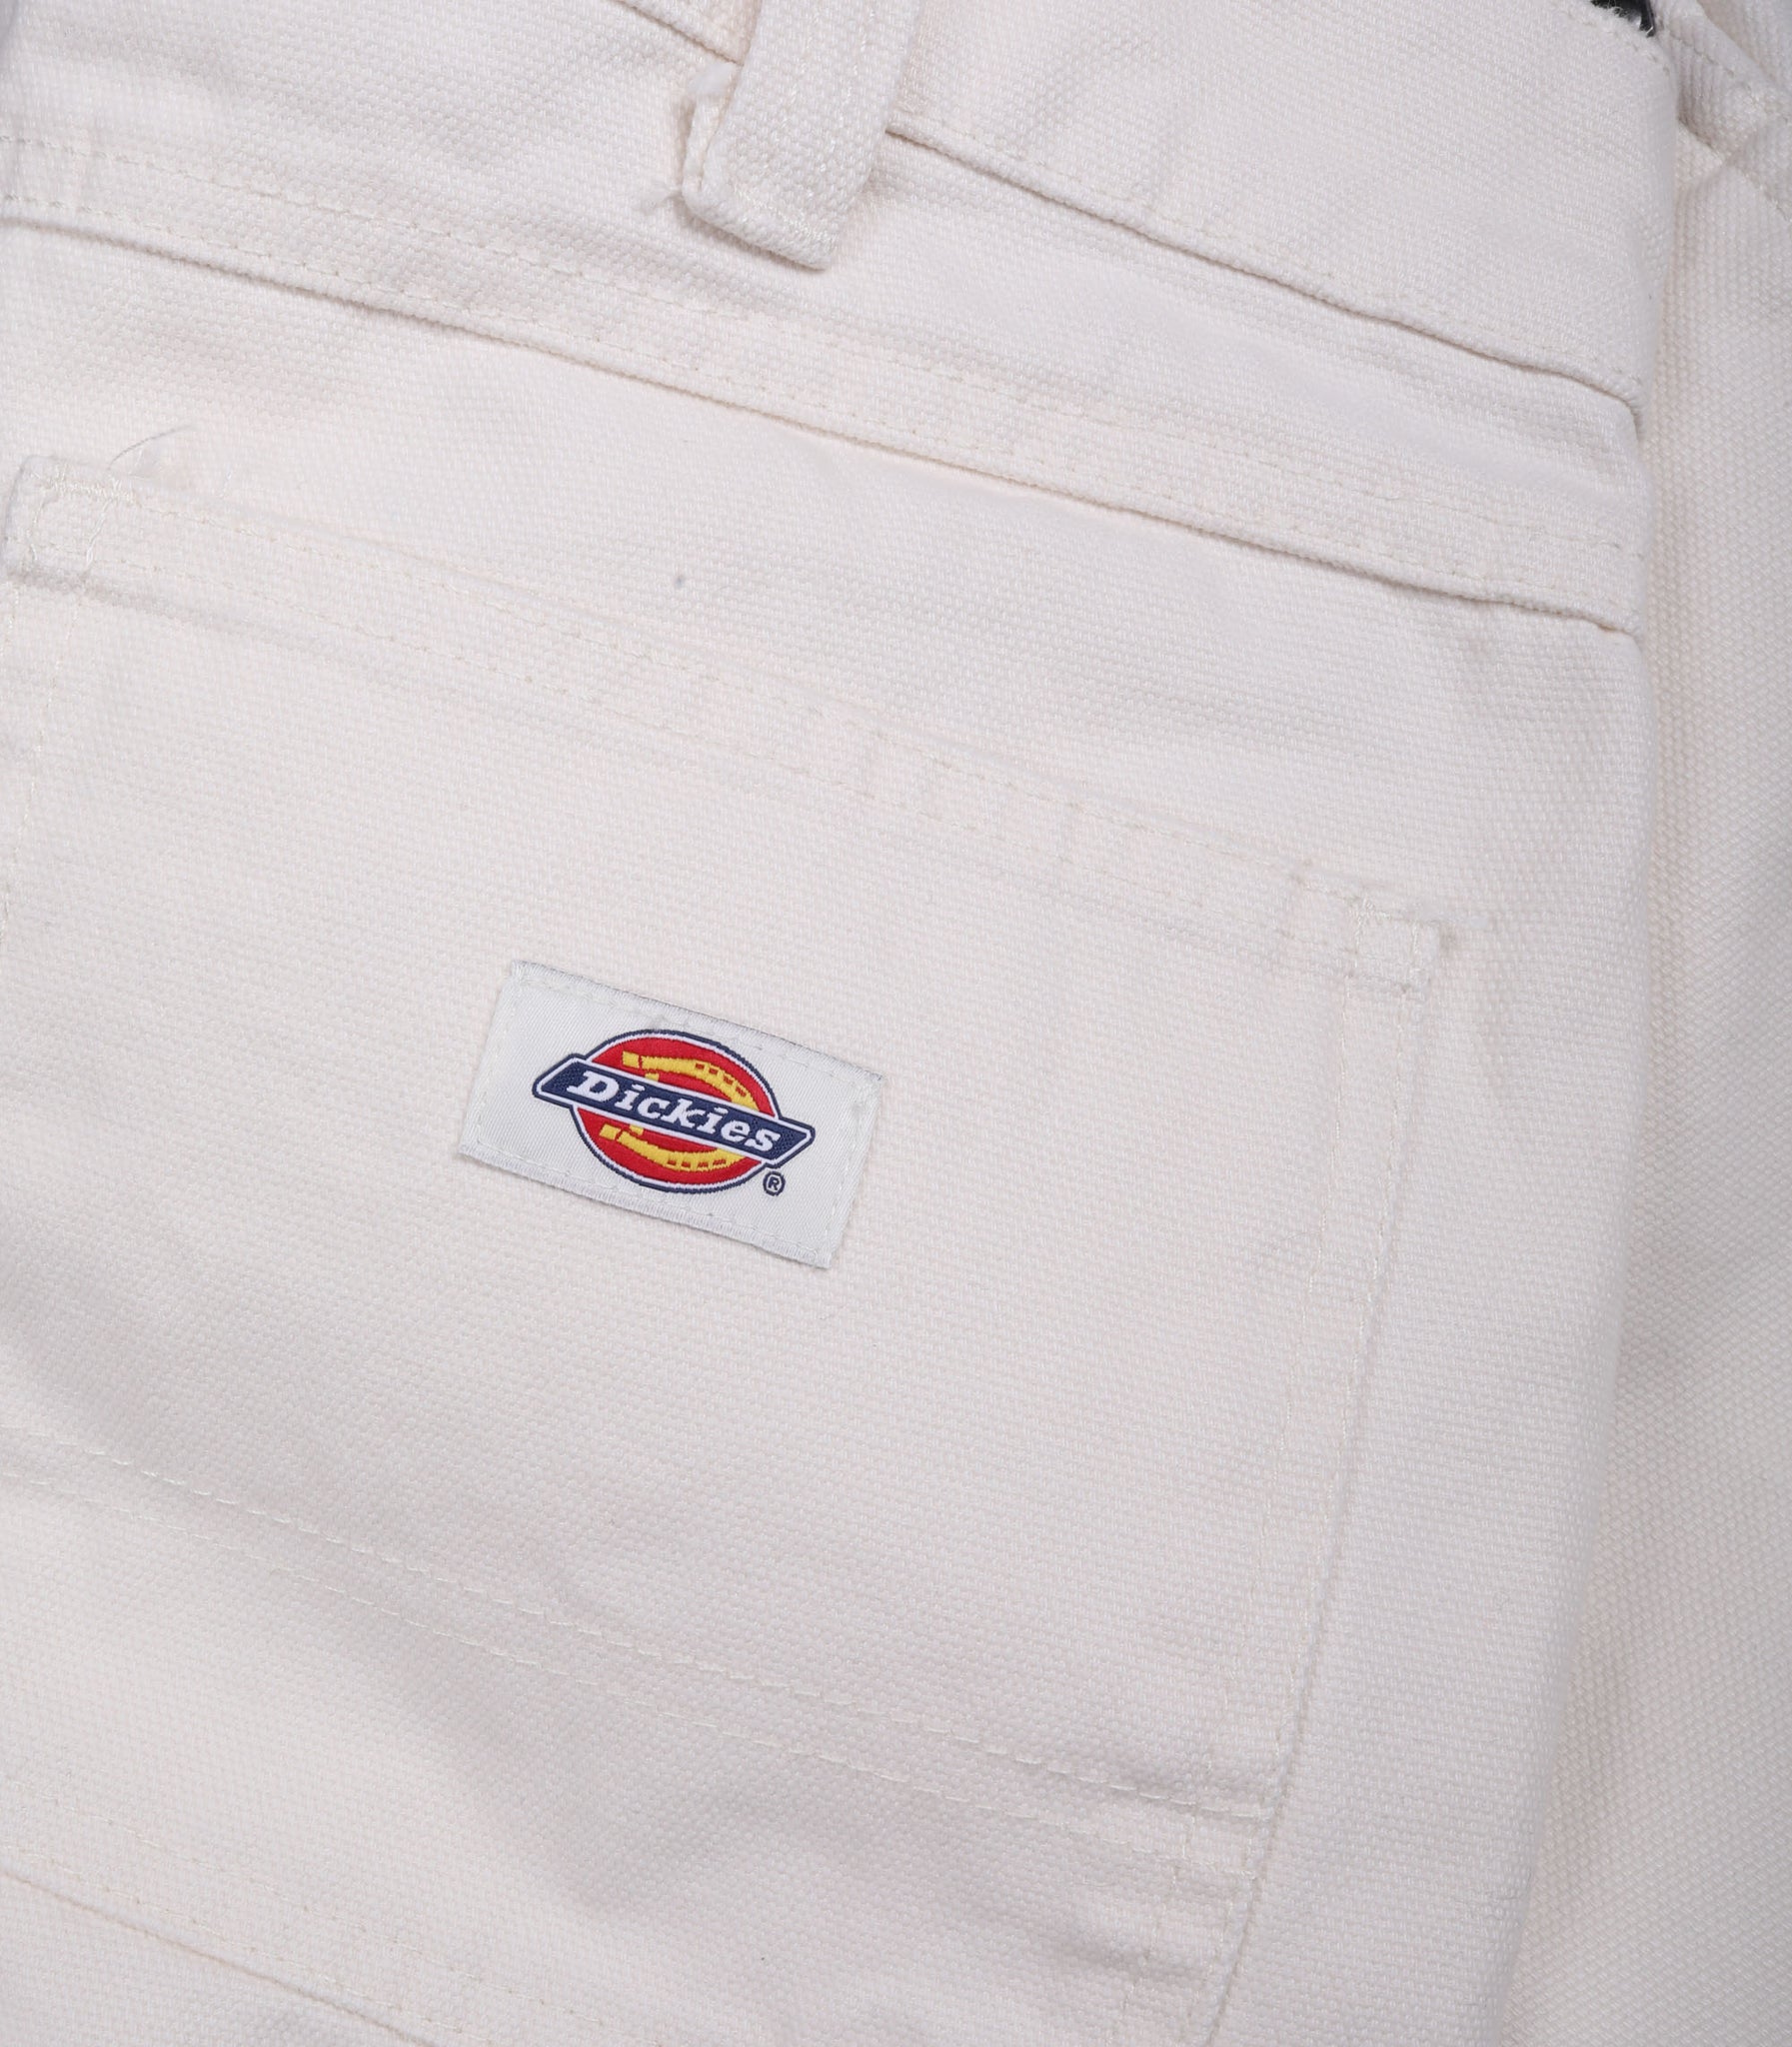 Dickies Duck Canvas Short W Stone Washed Cloud